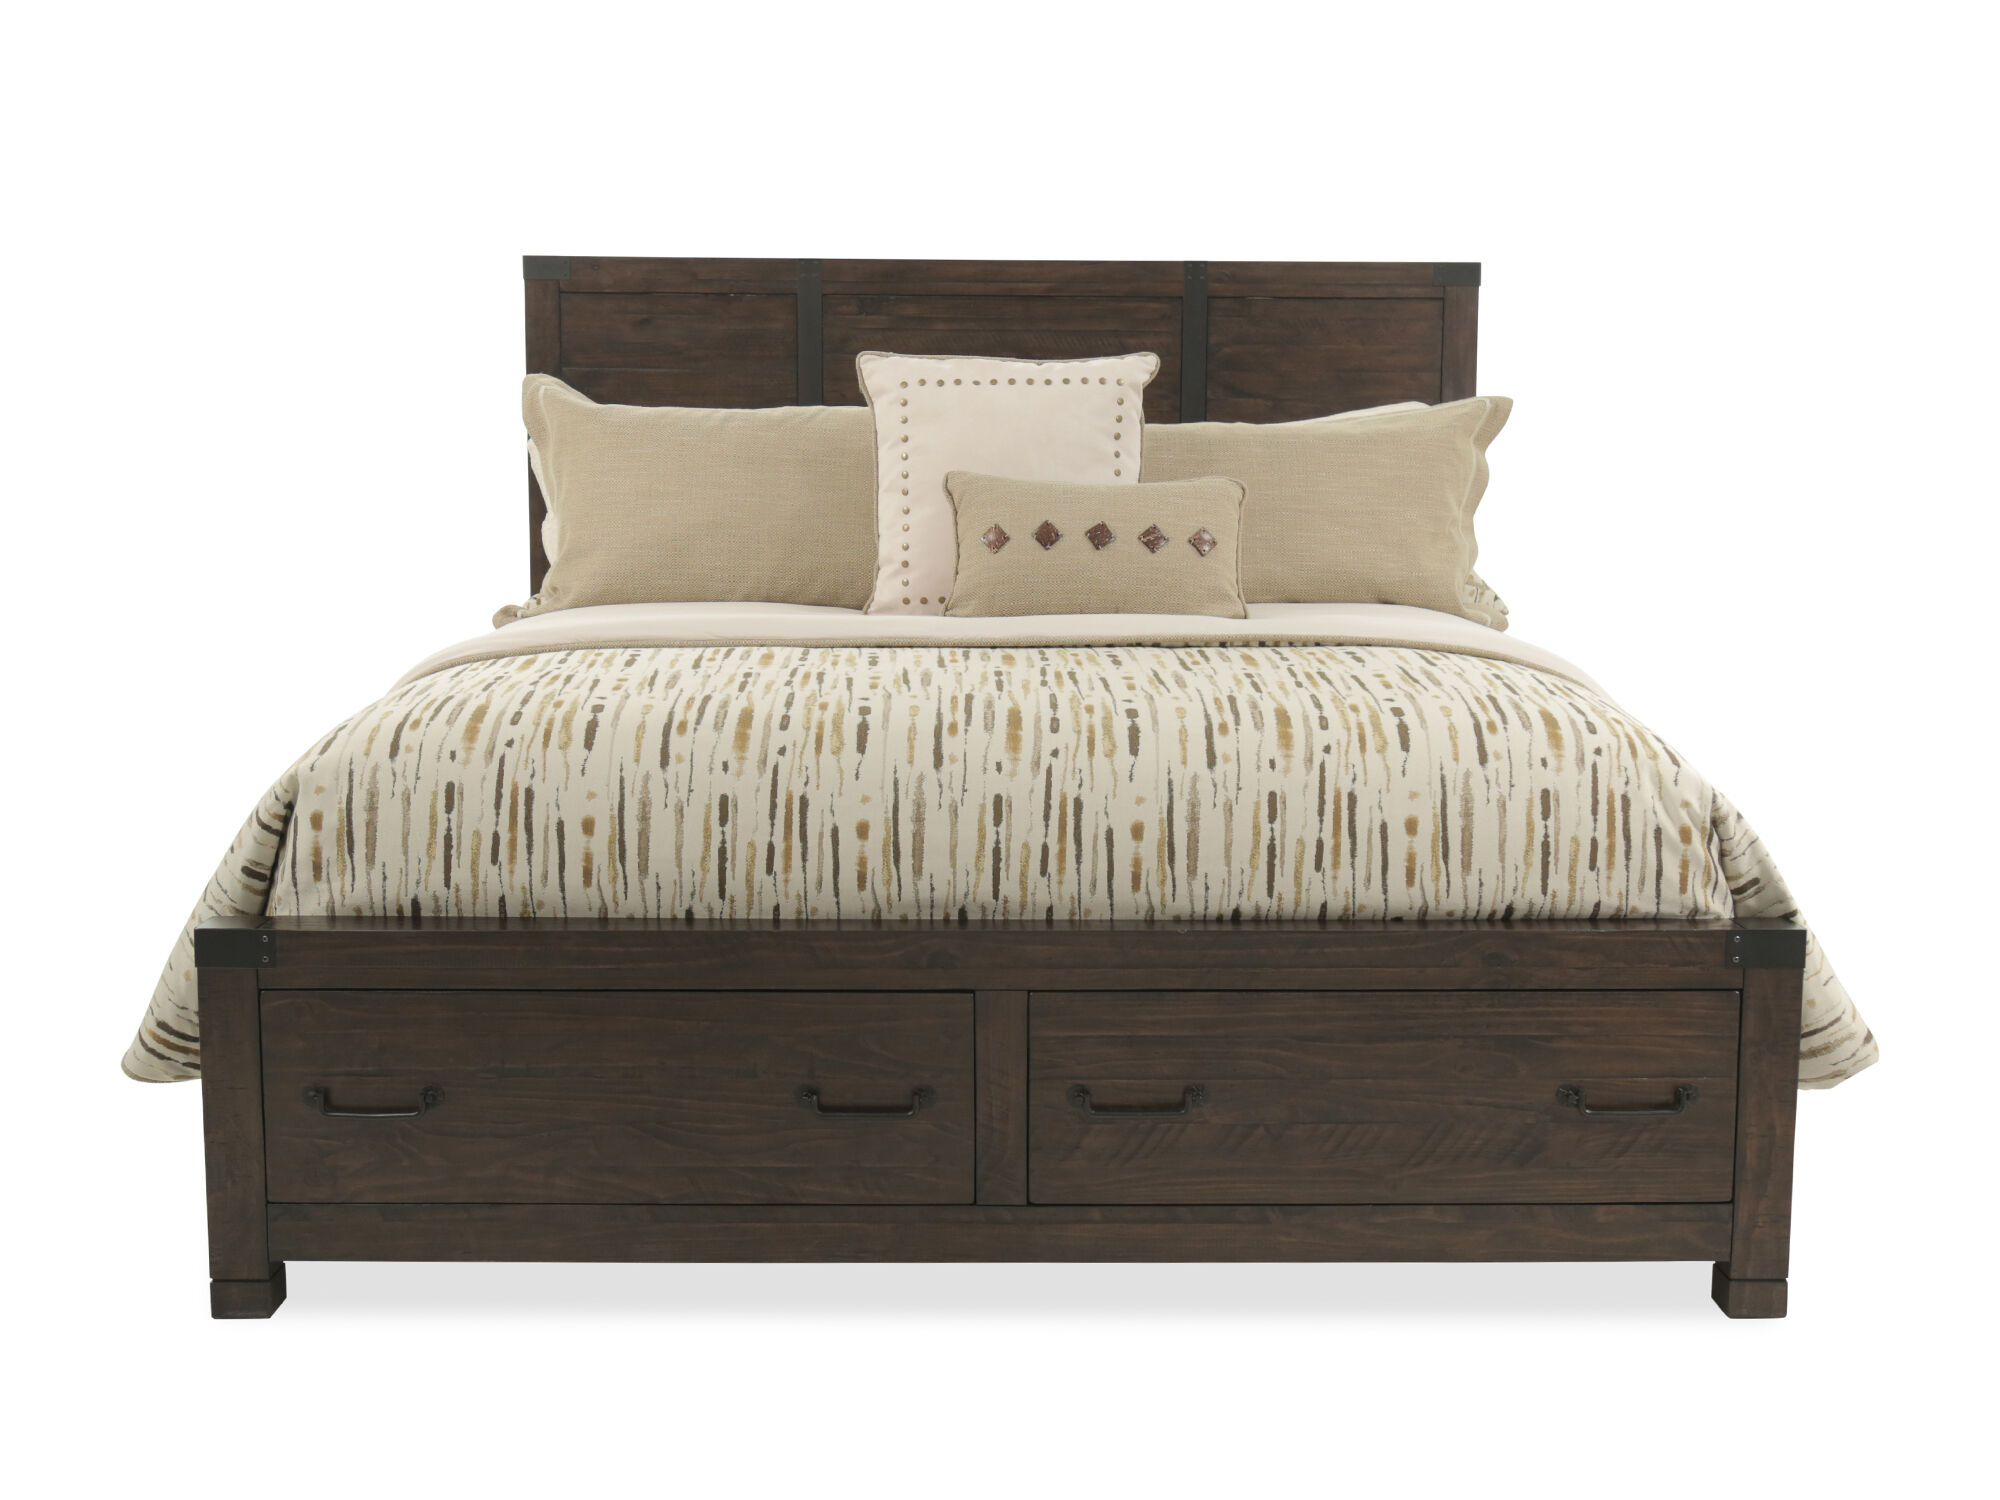 Rustic Pine Mathis Brothers Furniture, Rancho King Bed Pine